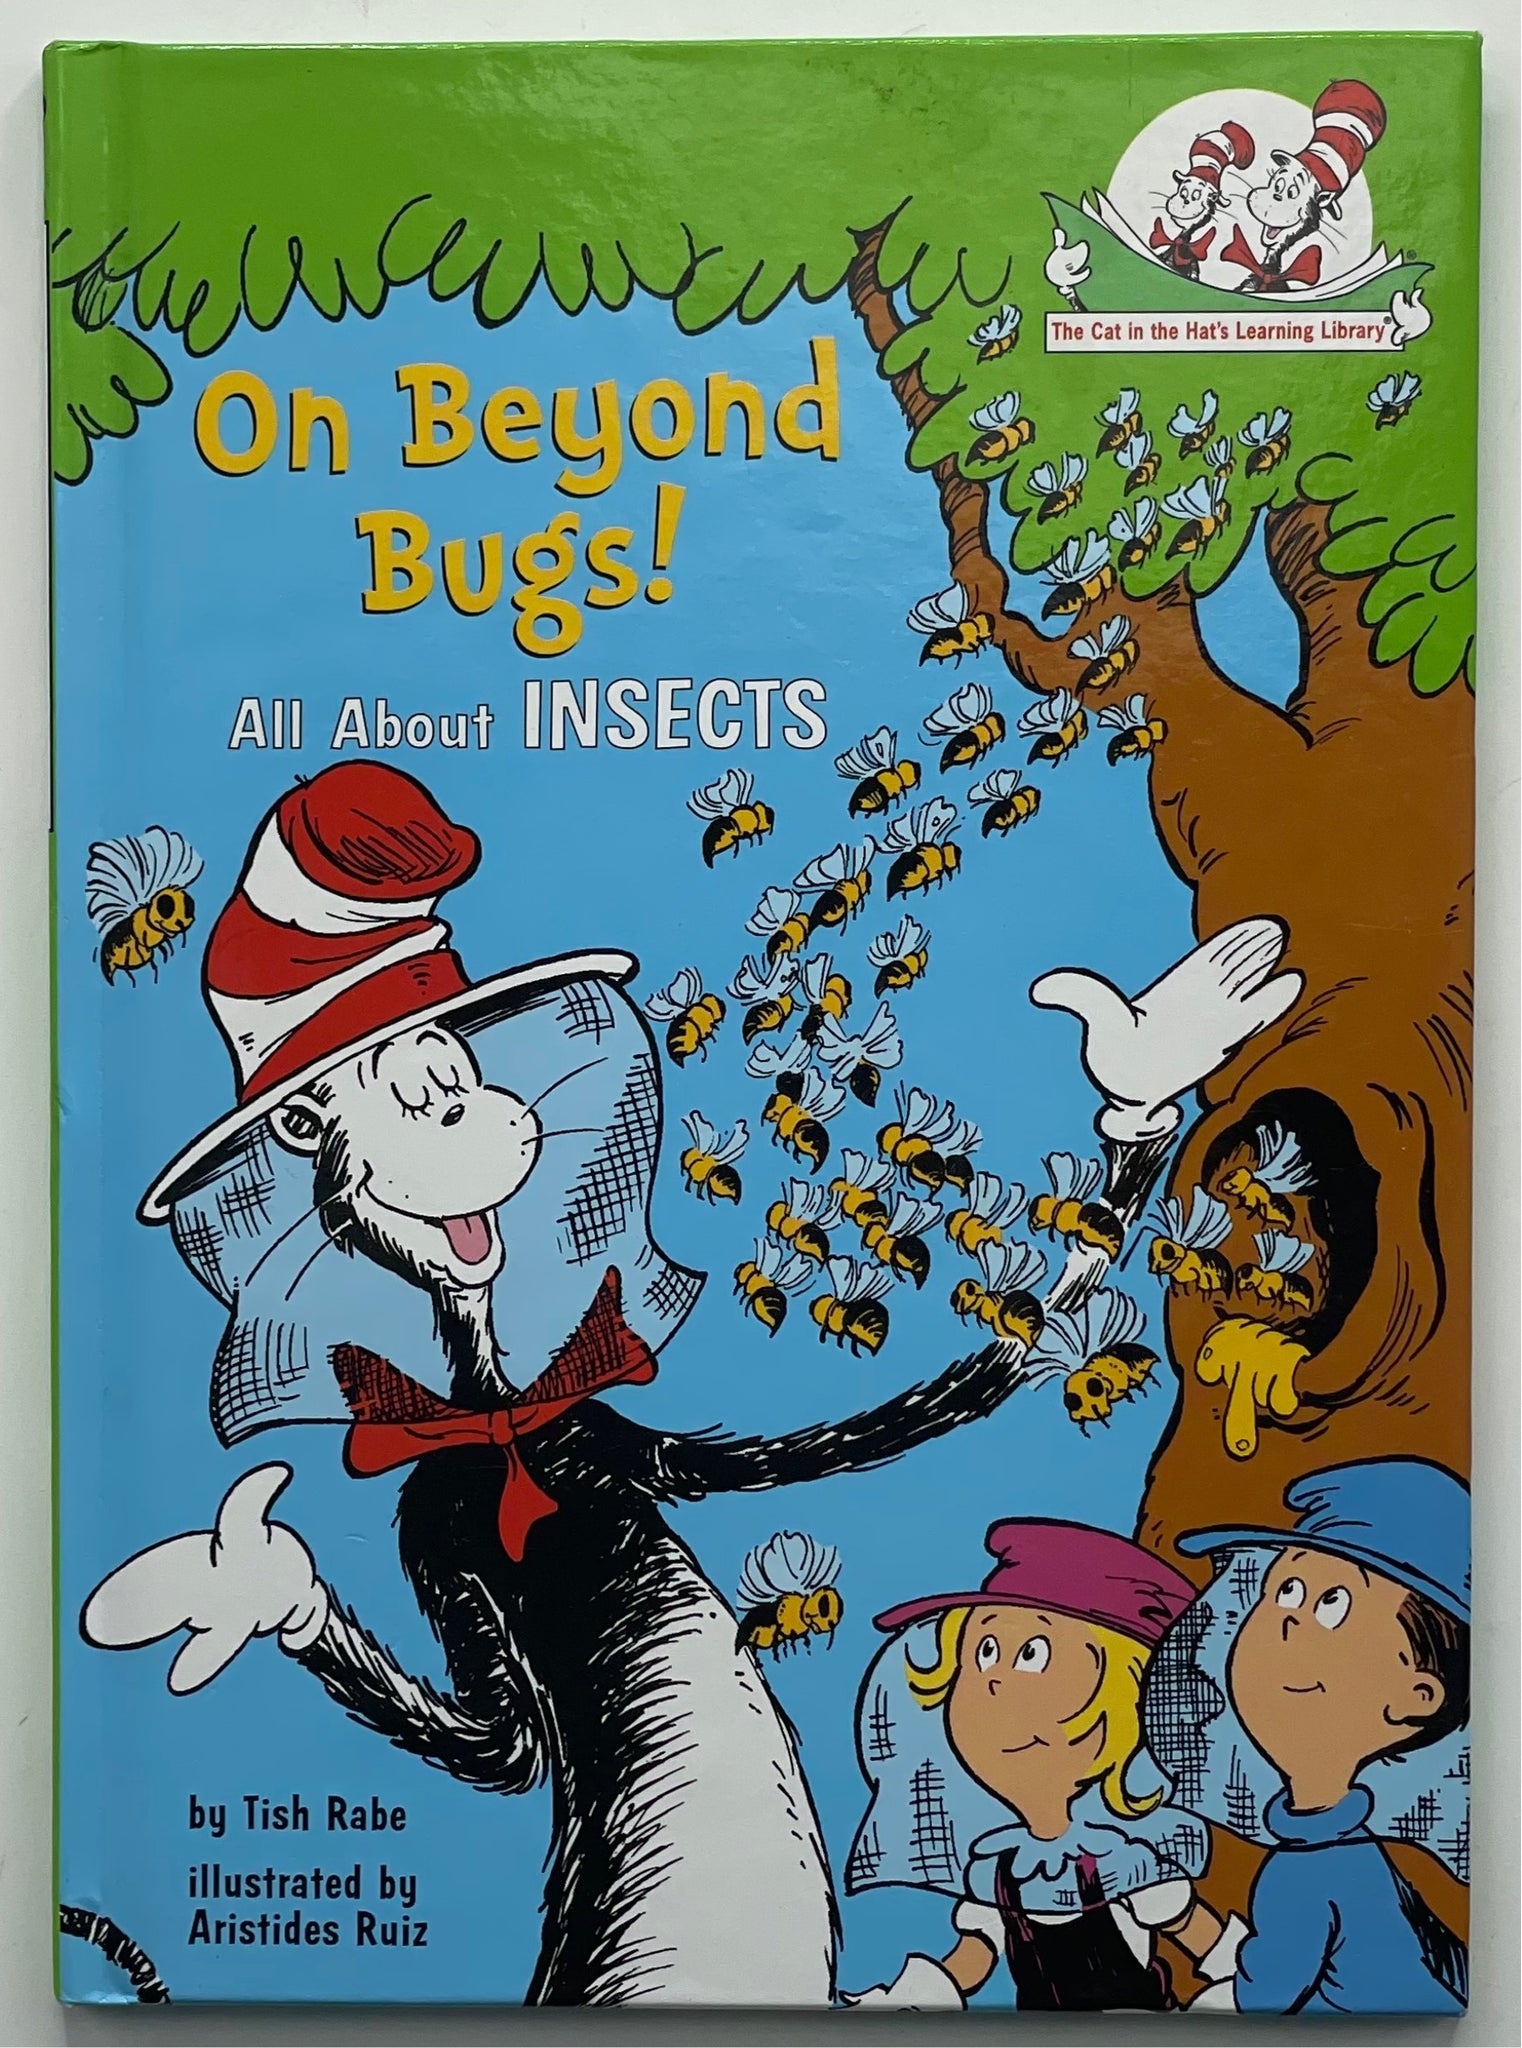 On Beyond Bugs!: All About Insects, Tish Rabe